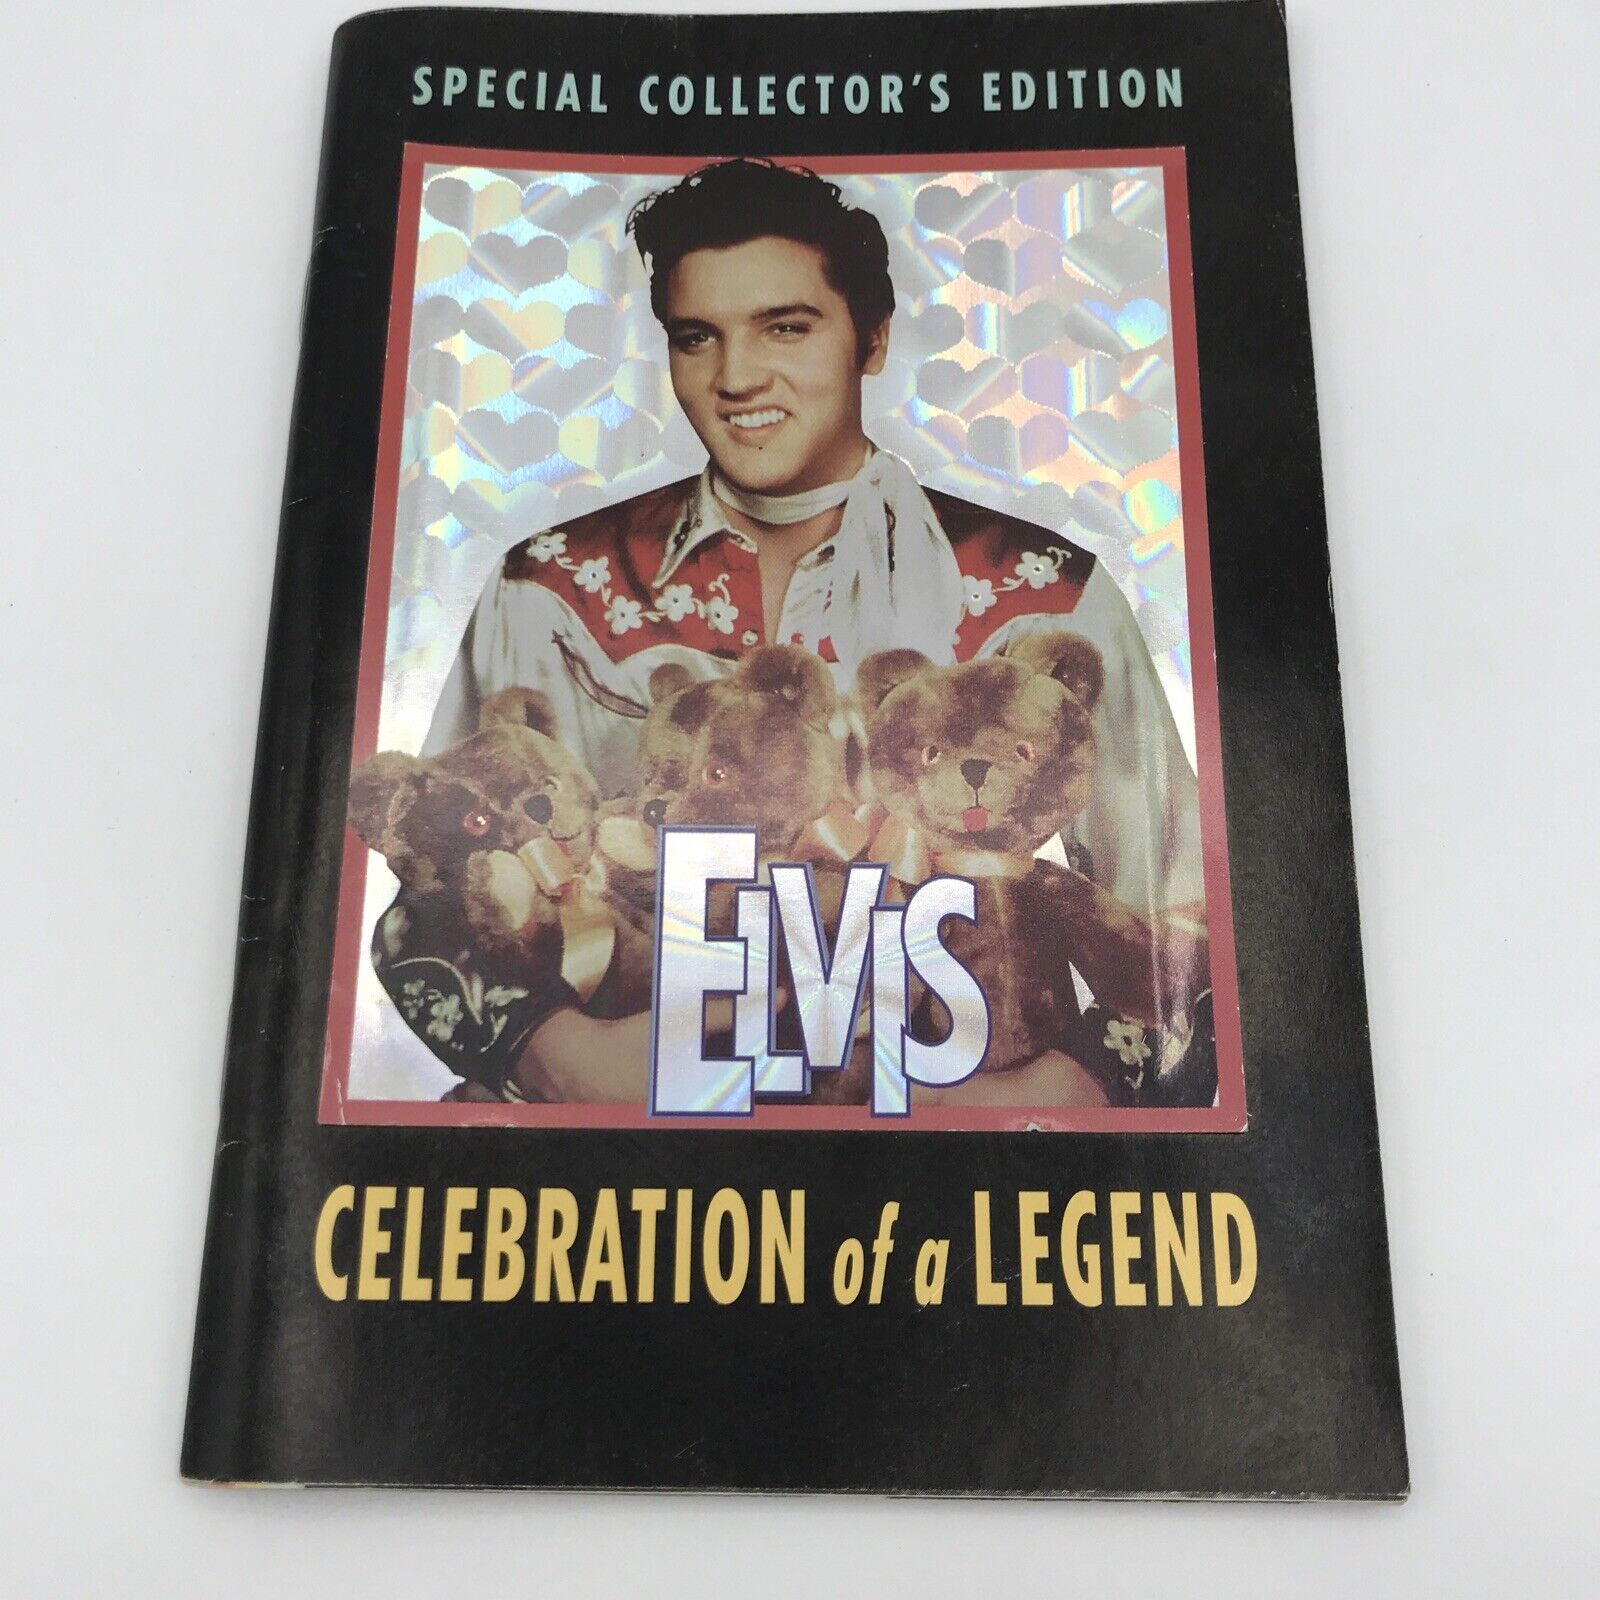 2002 ELVIS SPECIAL COLLECTOR\'S EDITION BOOK BOOKLET CELEBRATION OF A LEGEND